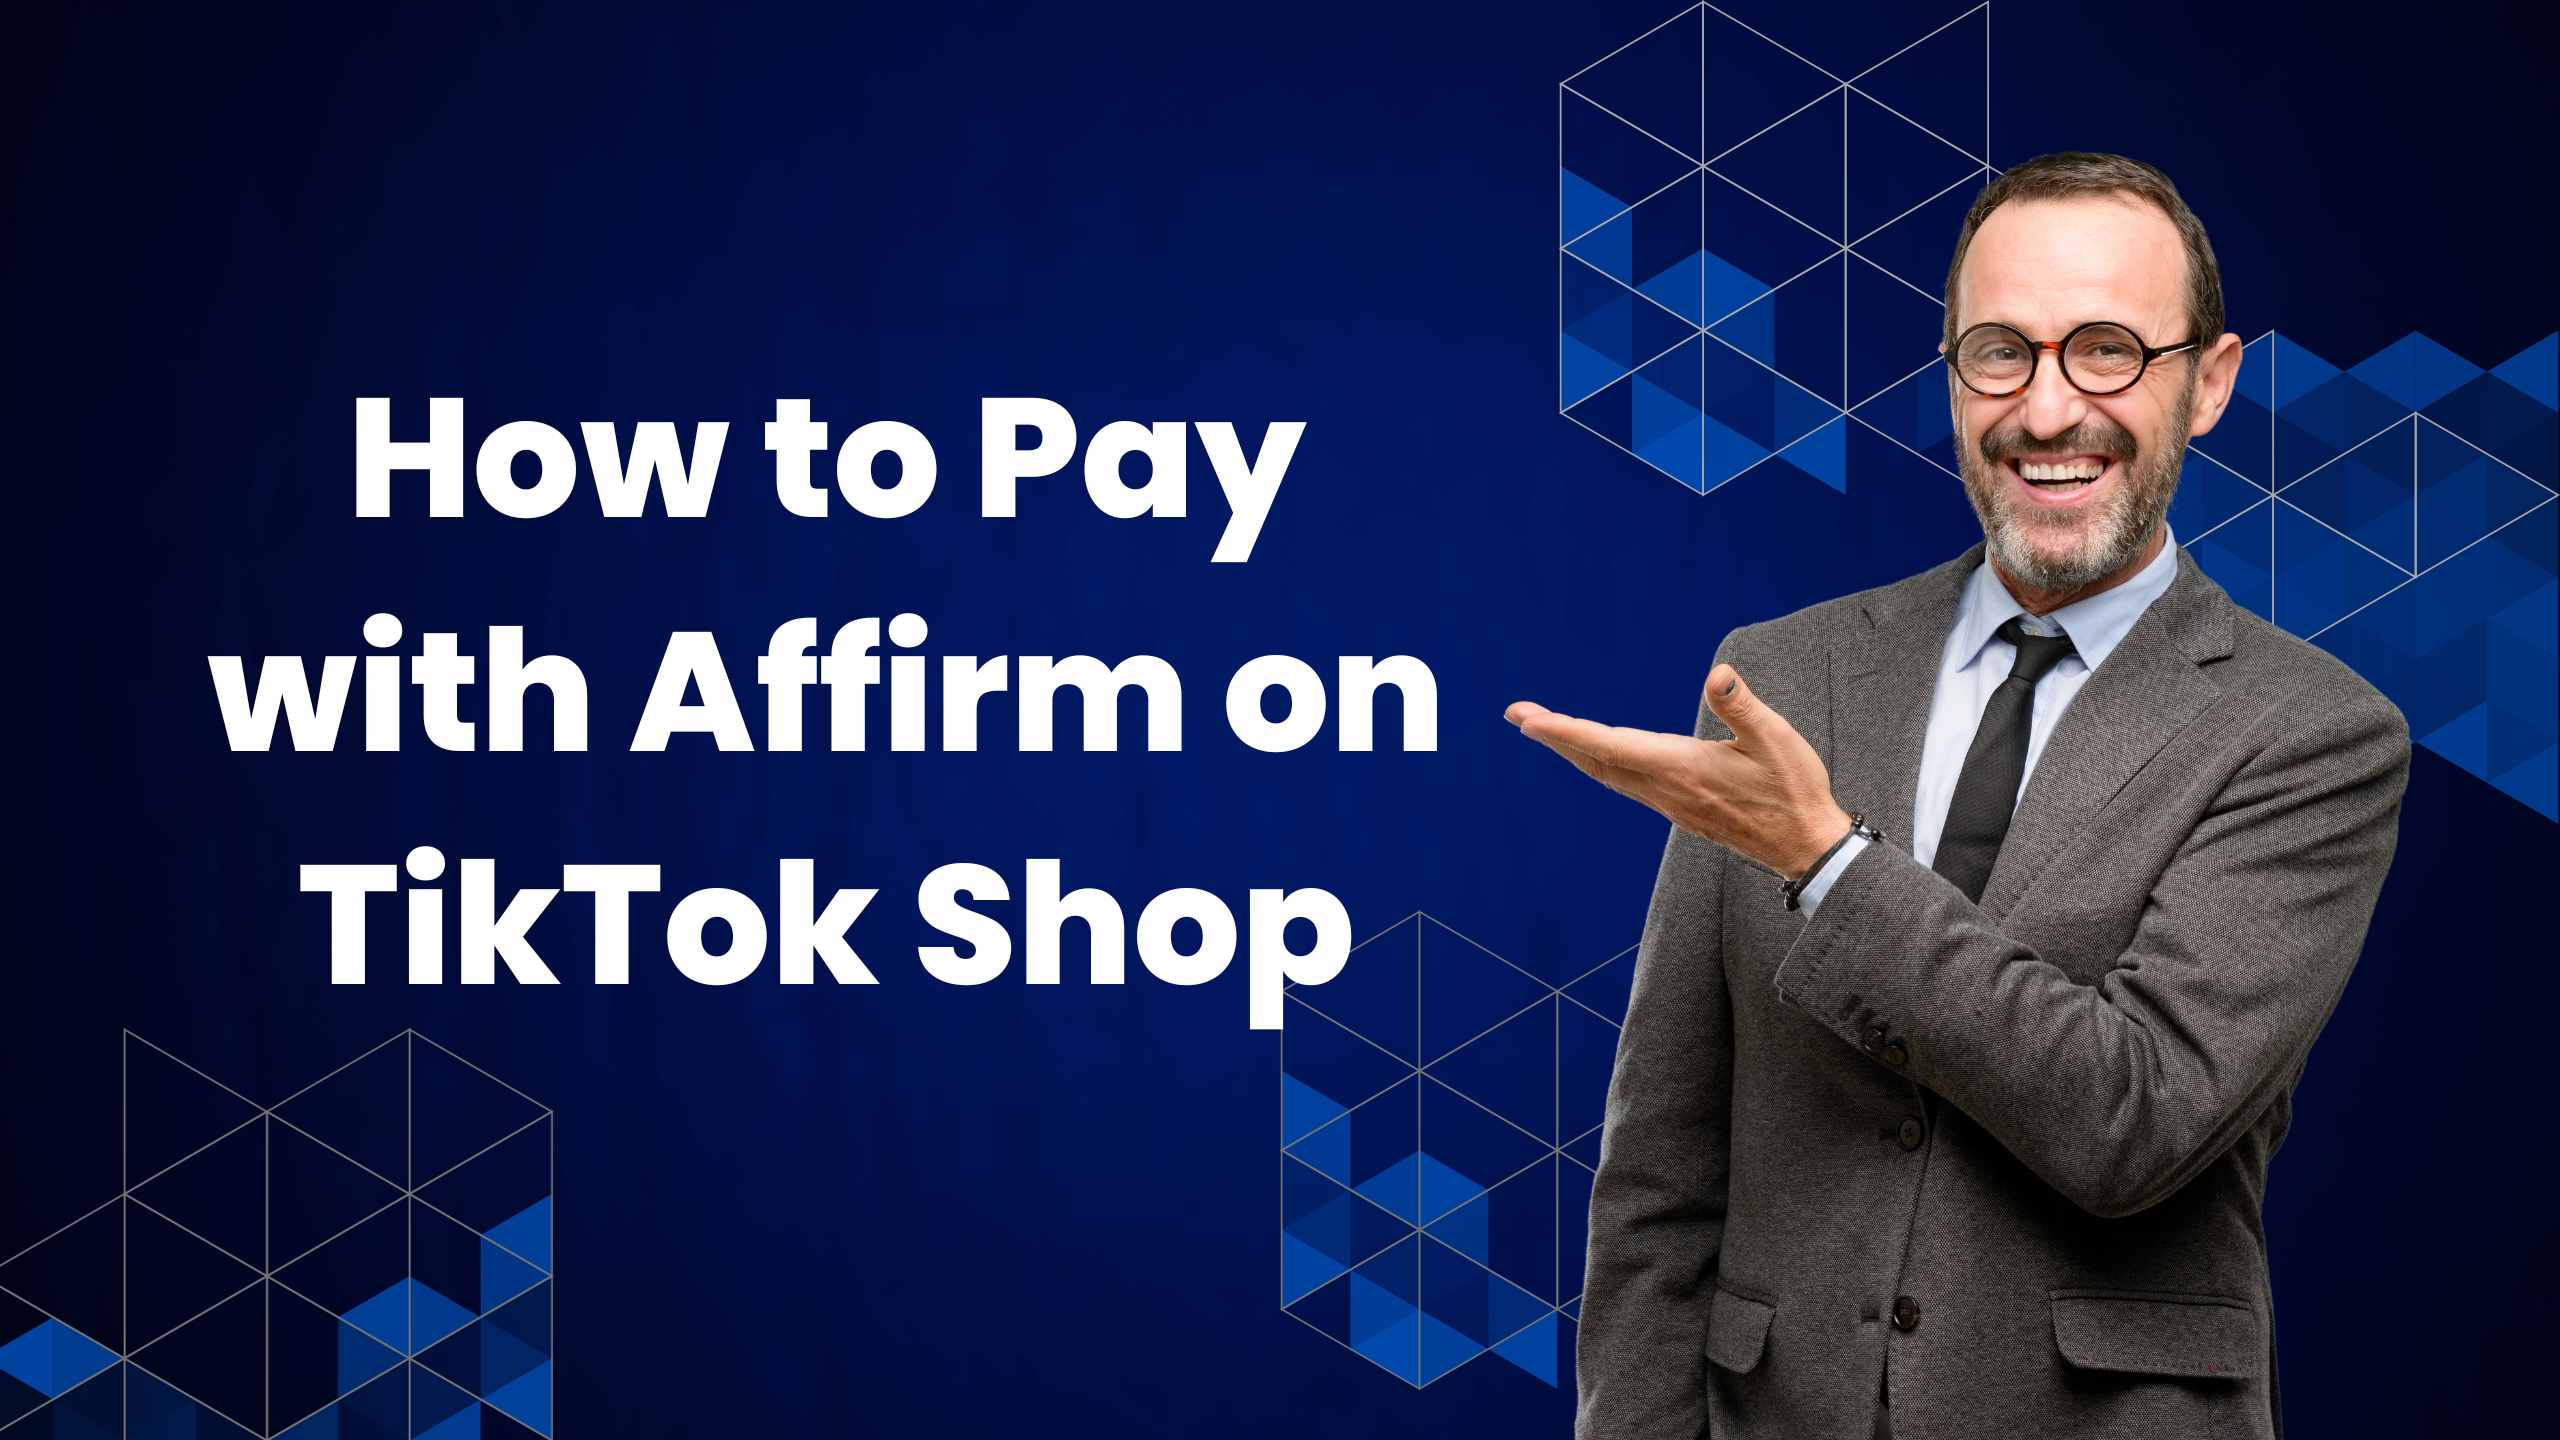 How to Pay with Affirm on TikTok Shop 2023